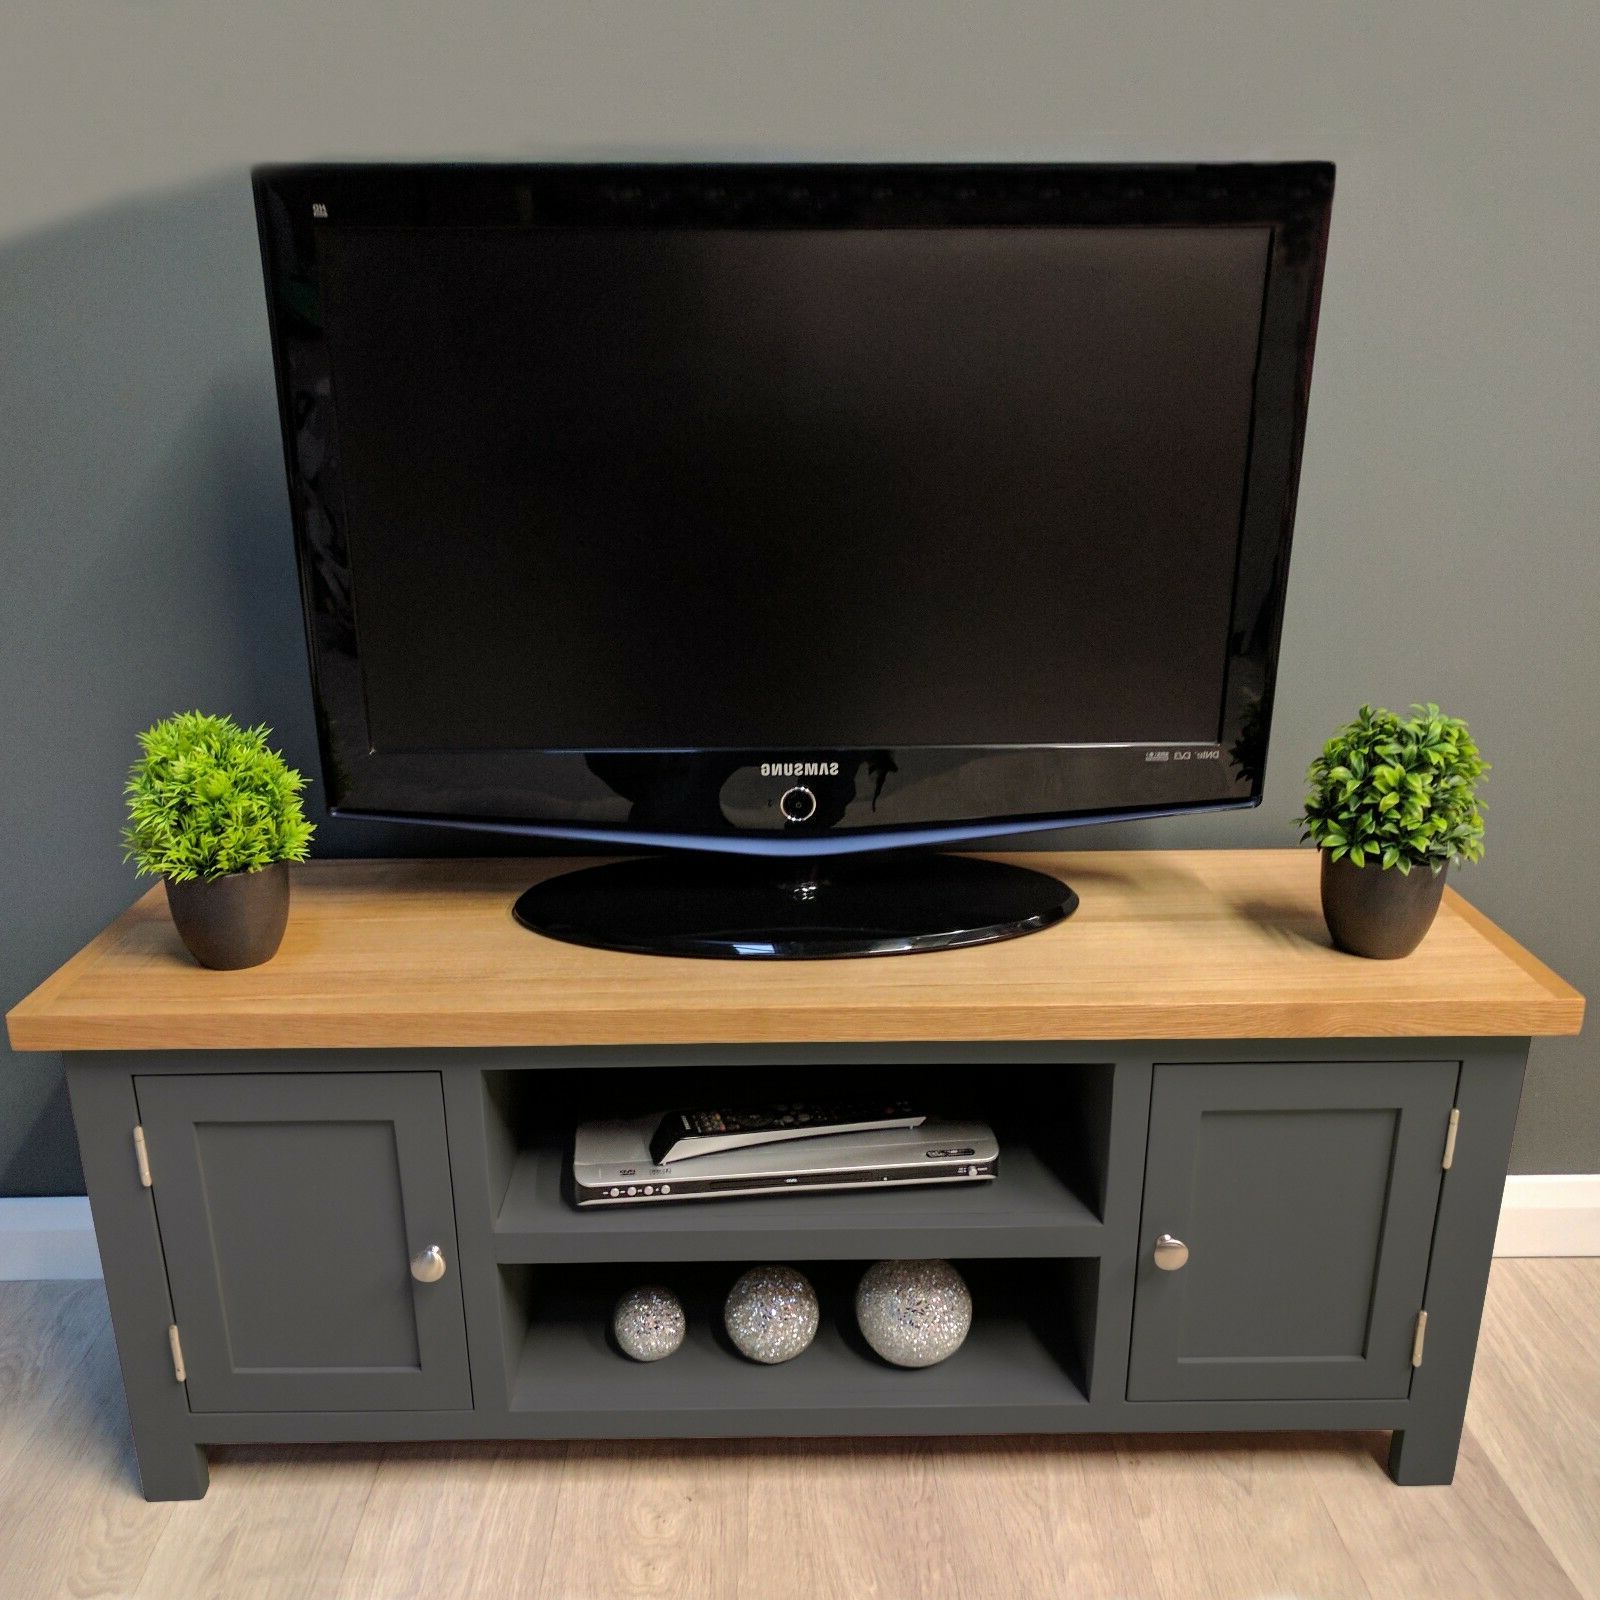 Painted Oak Tv Unit Large / Solid Wood / Dark Grey / Tv Throughout Richmond Tv Unit Stands (View 3 of 20)